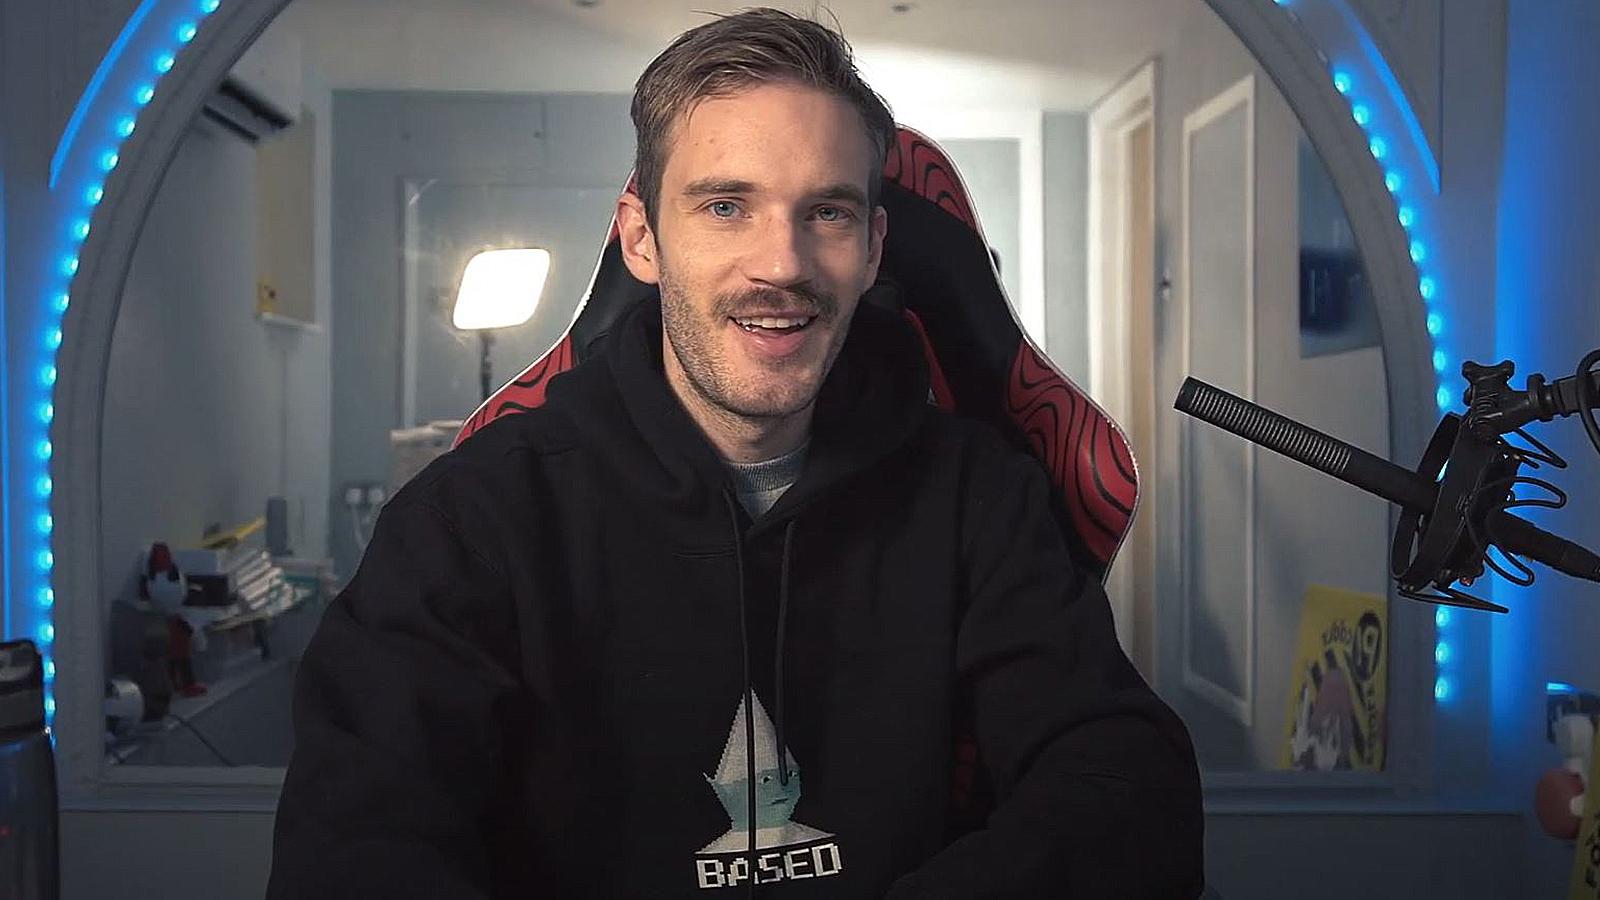 PewDiePie speaks to the camera while sitting at his streaming station.